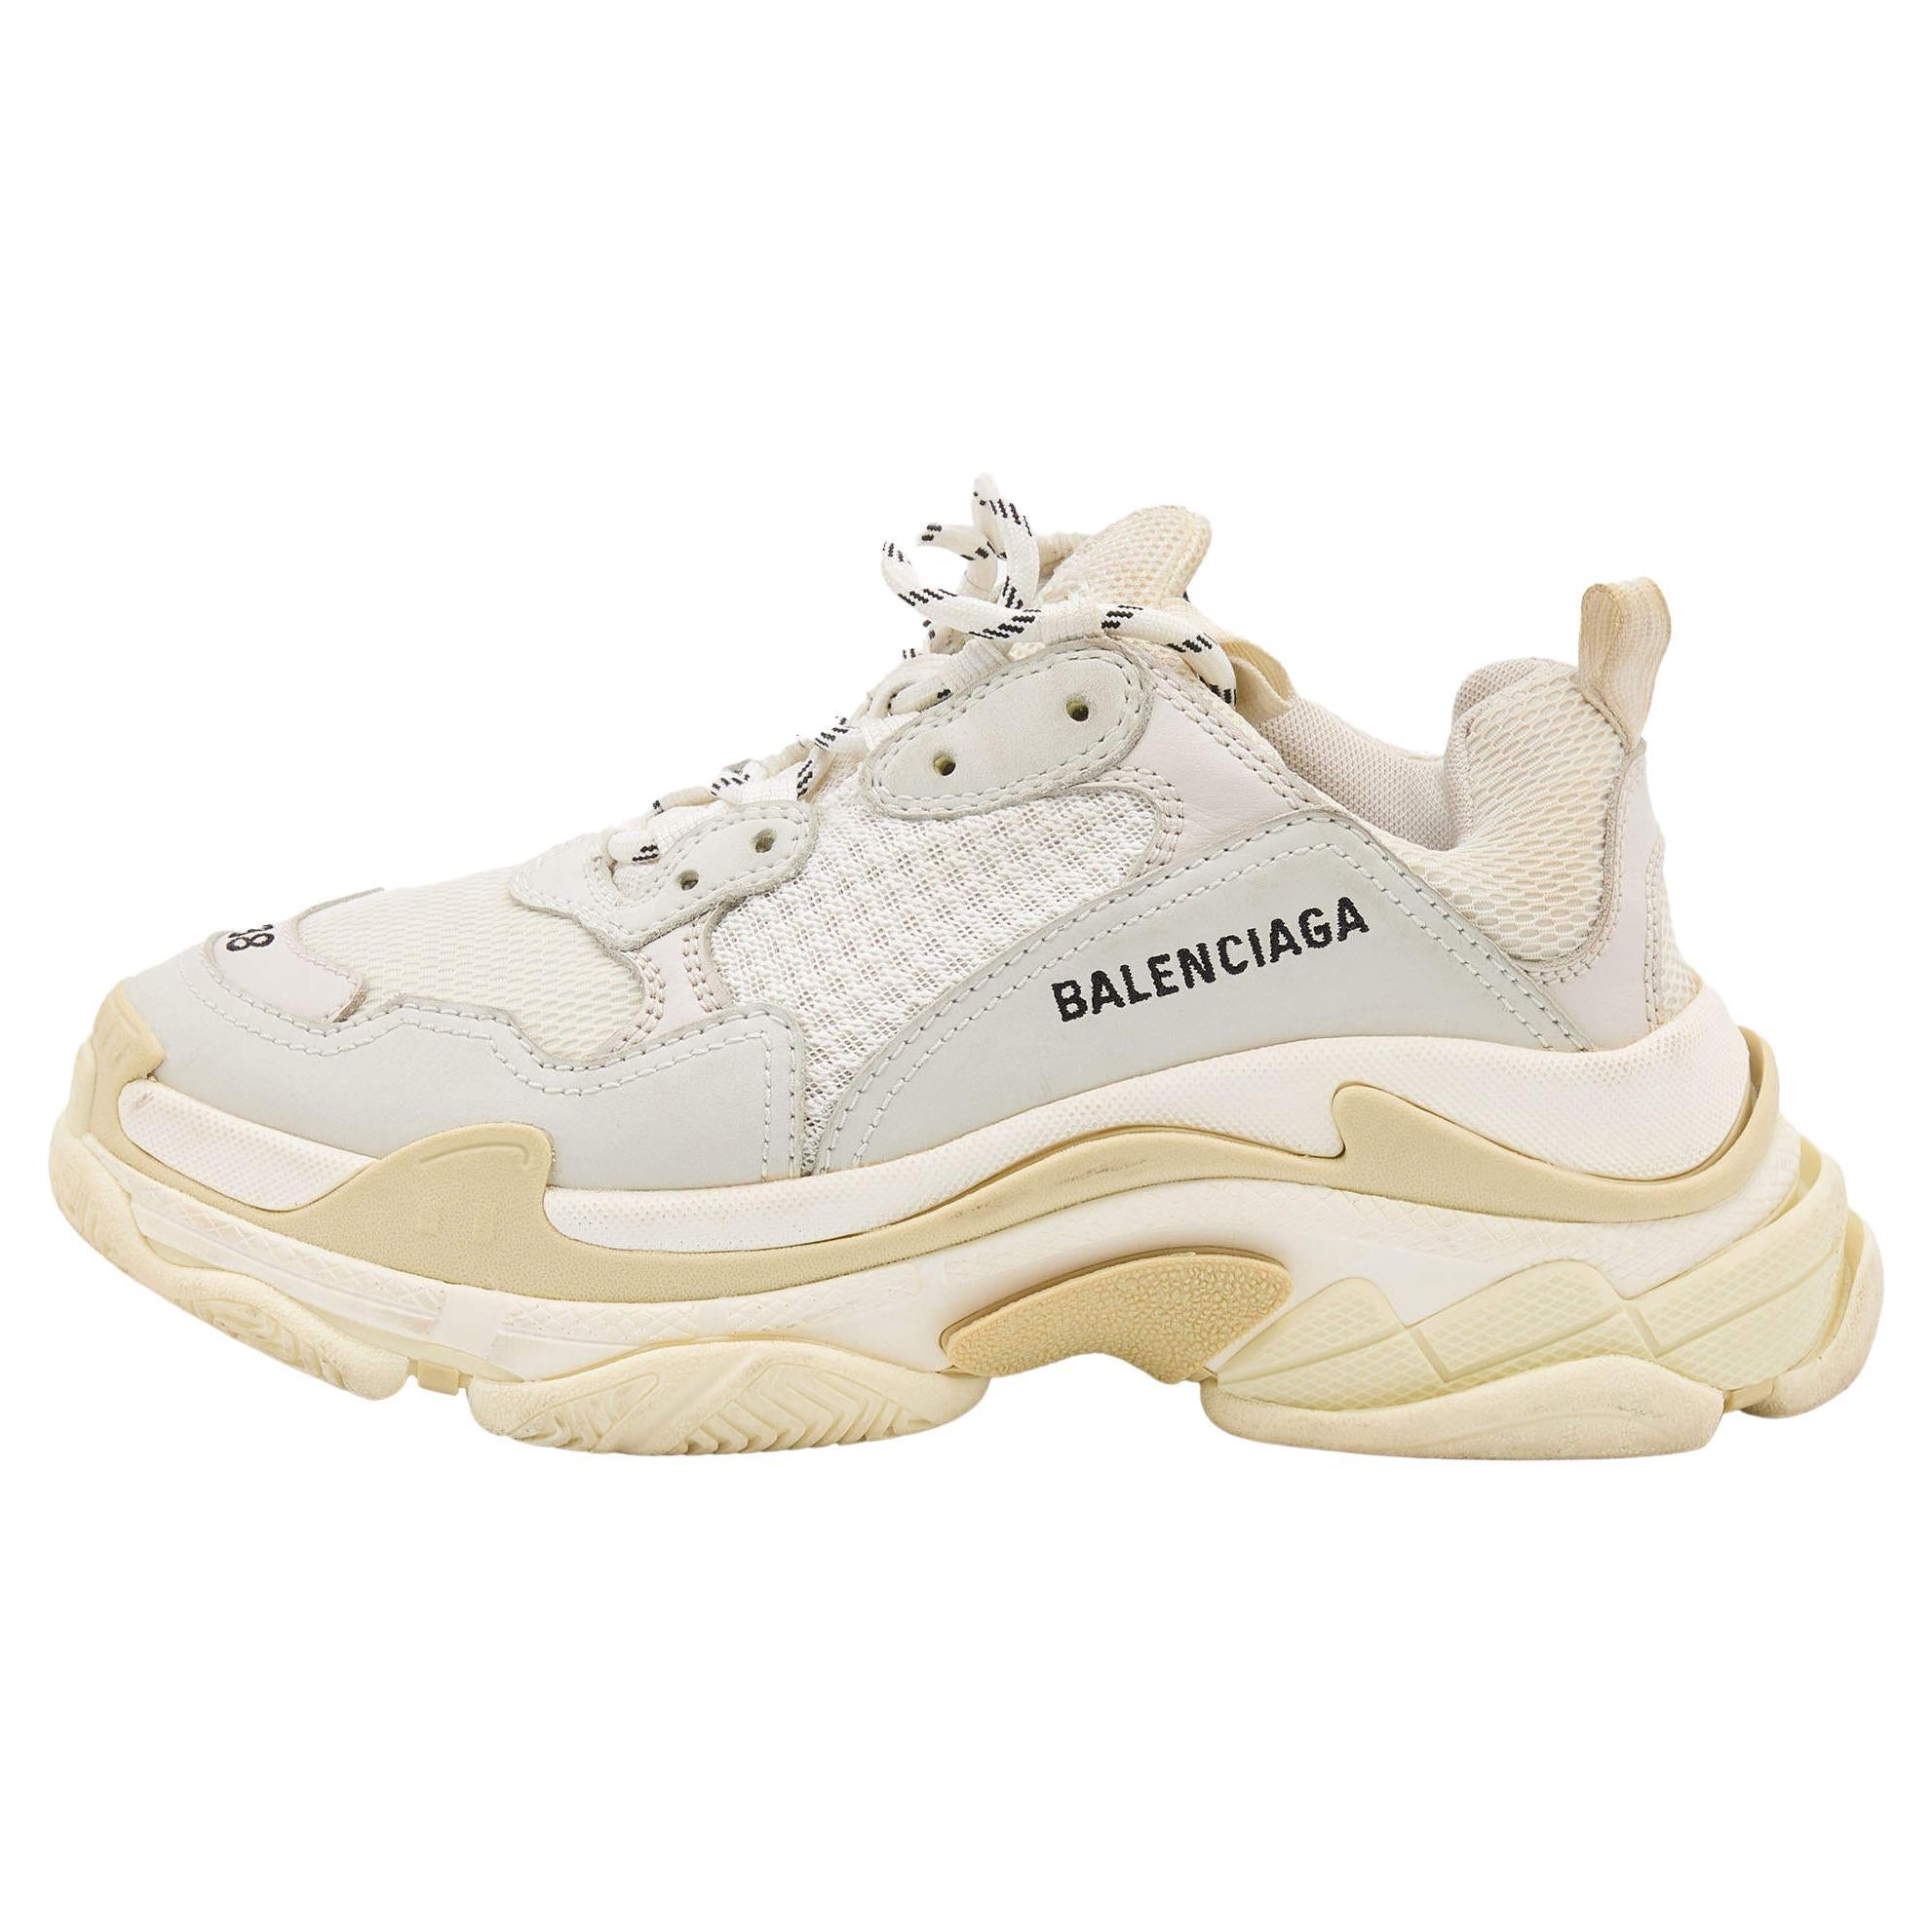 Balenciaga White/Grey Leather and Mesh Triple S Sneakers Size 38